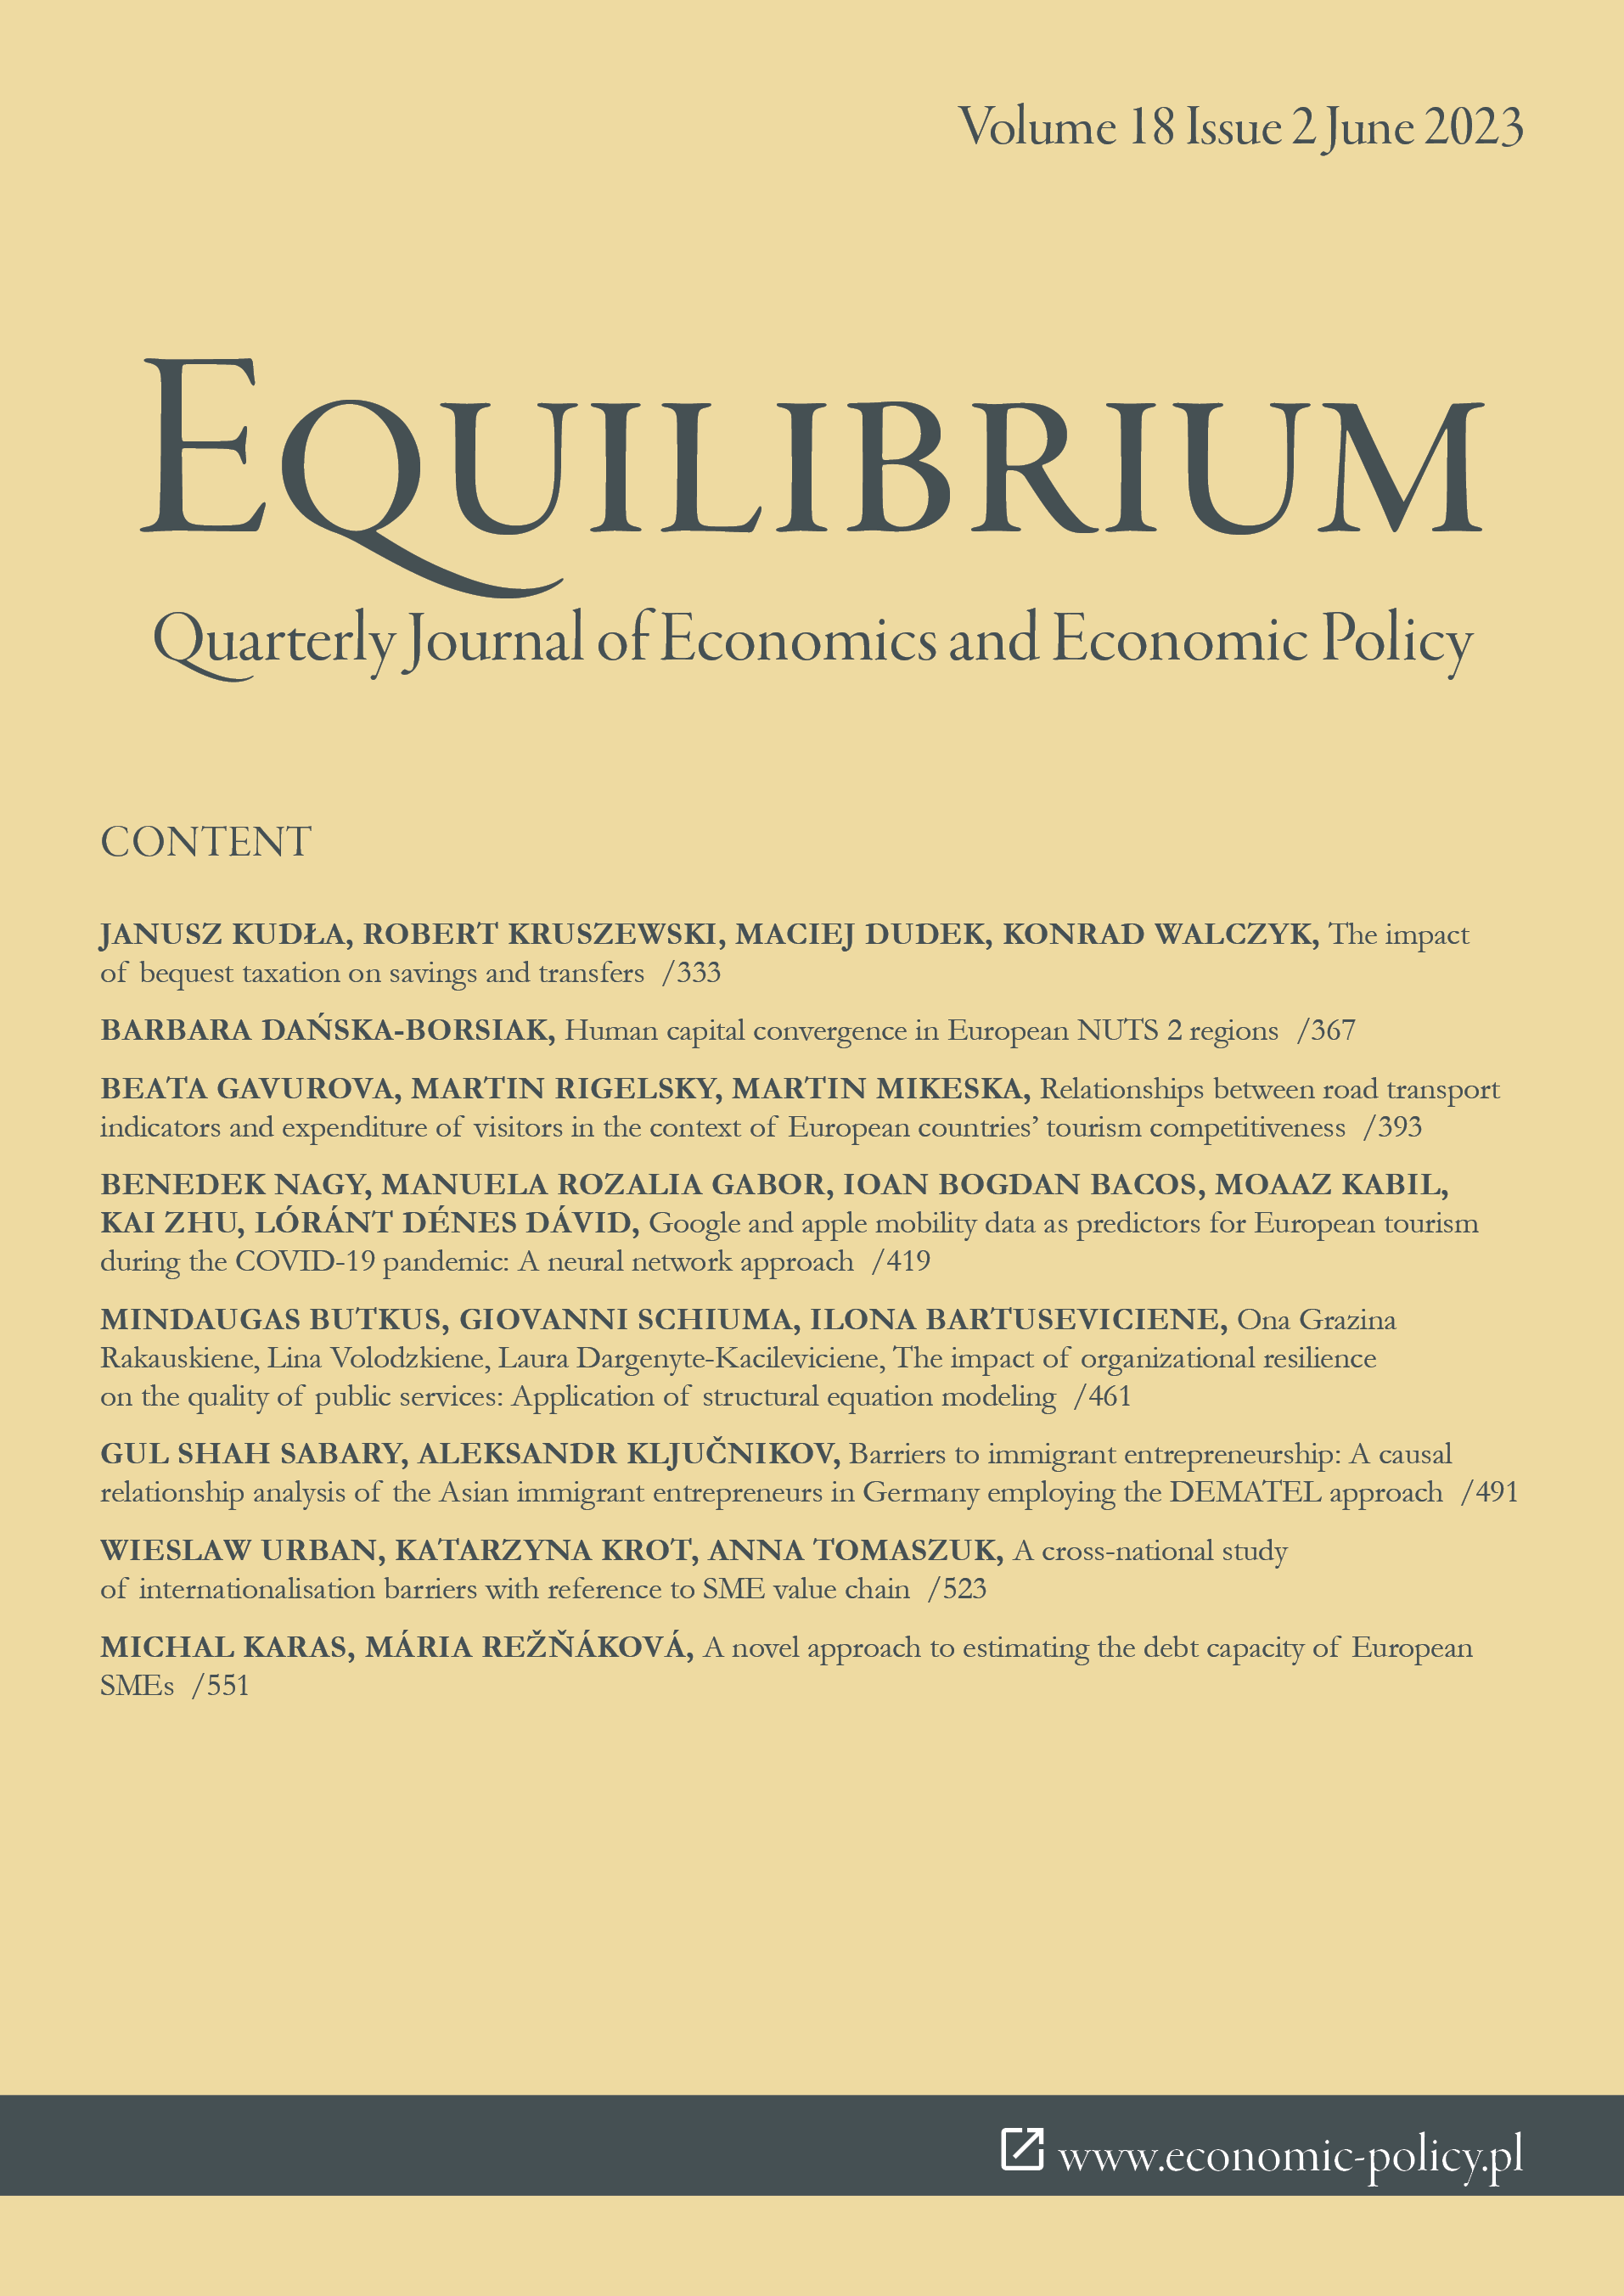 Barriers to immigrant entrepreneurship: A causal relationship analysis of the Asian immigrant entrepreneurs in Germany employing the DEMATEL approach